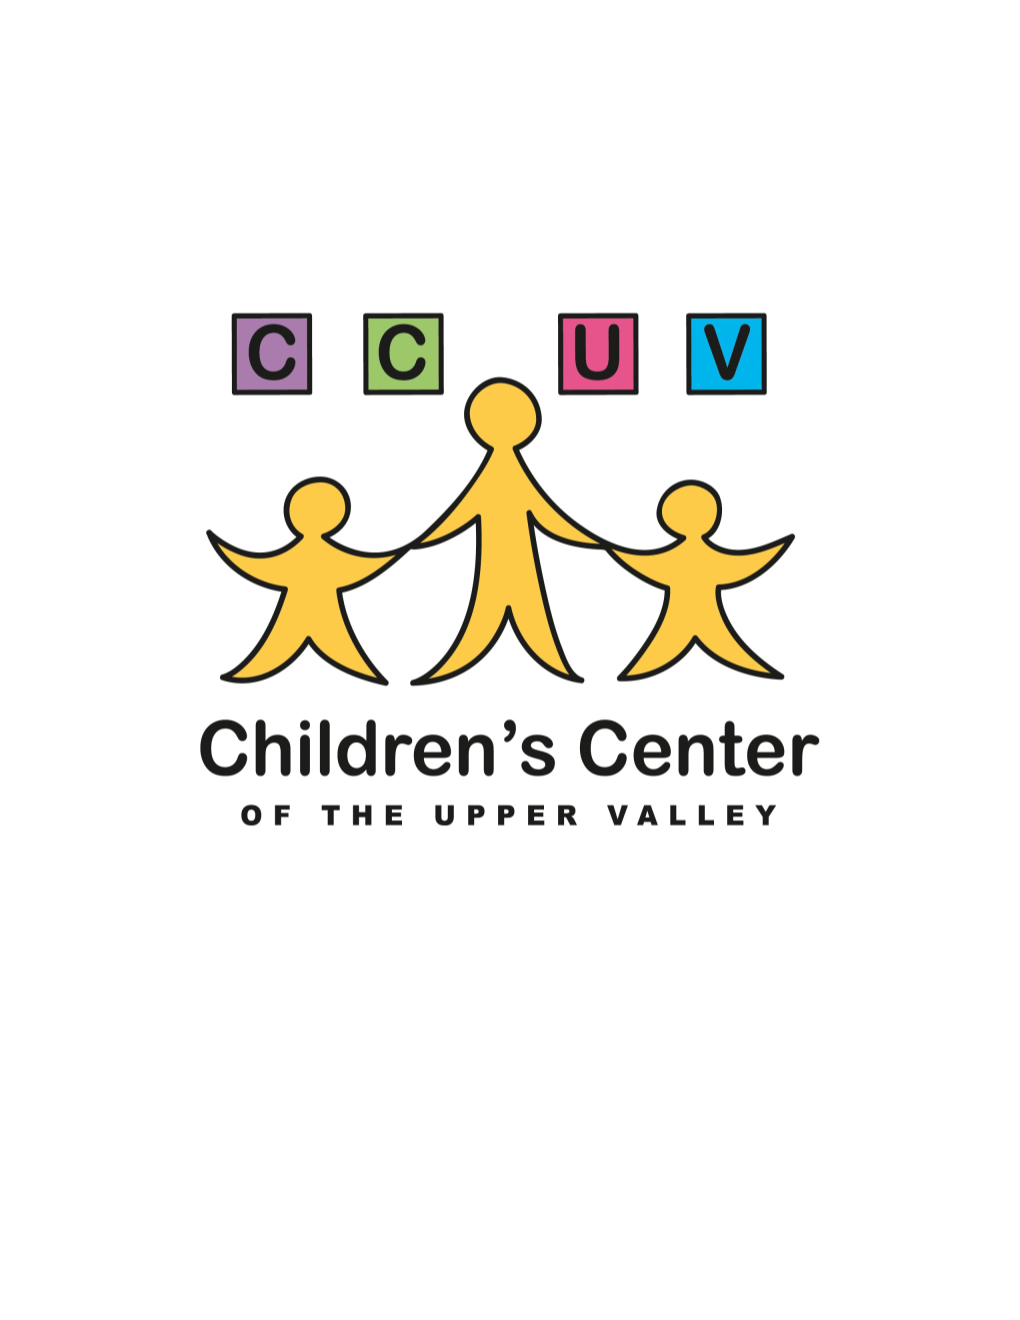 Welcome to the Children S Center of the Upper Valley!